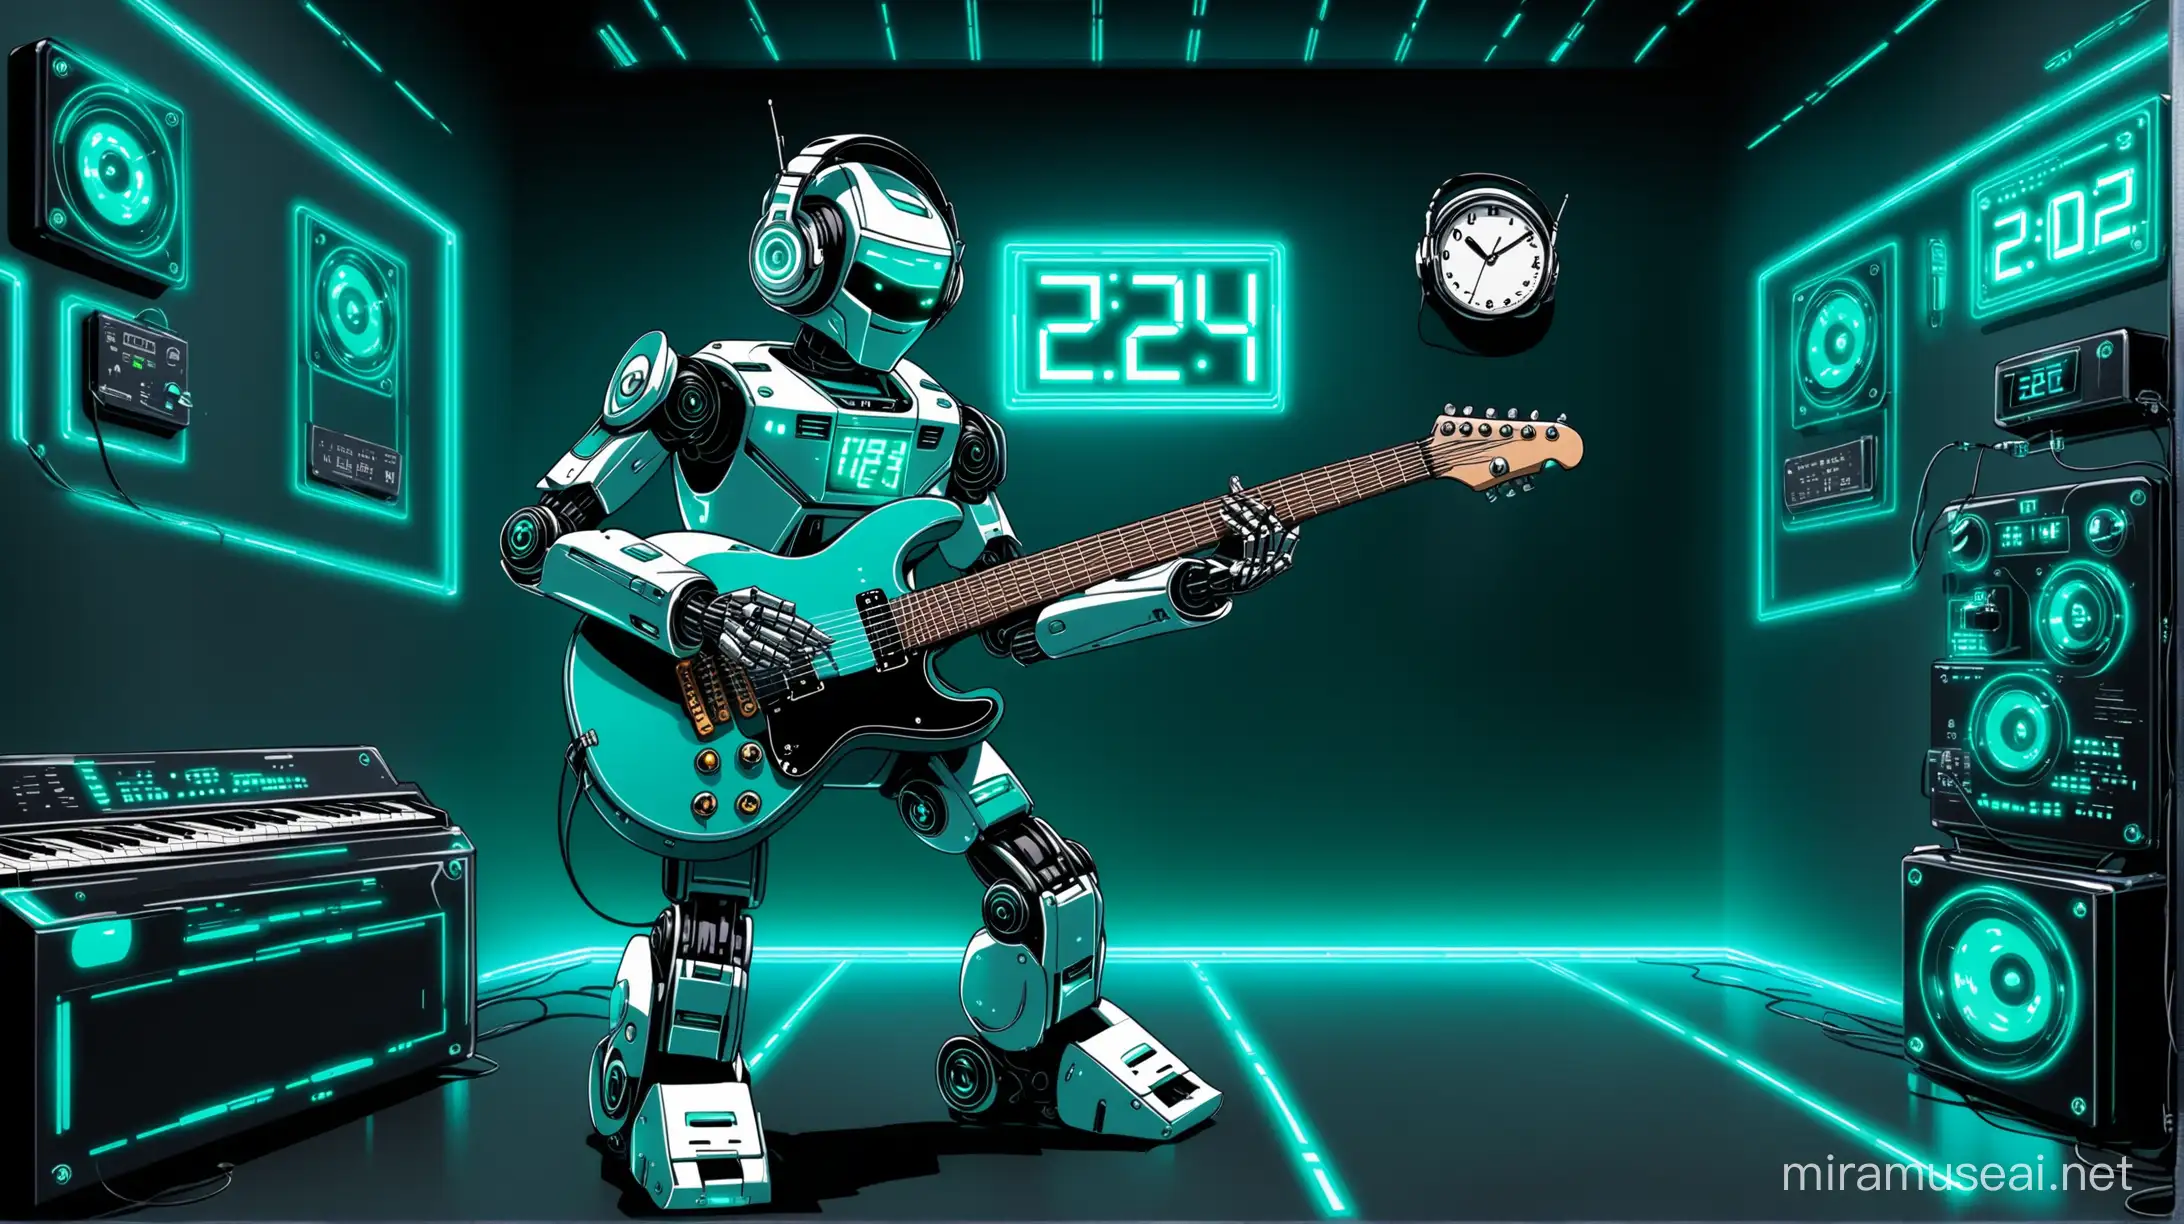 Futuristic Robot Jamming Rock n Roll Guitar in Green and Blue Room